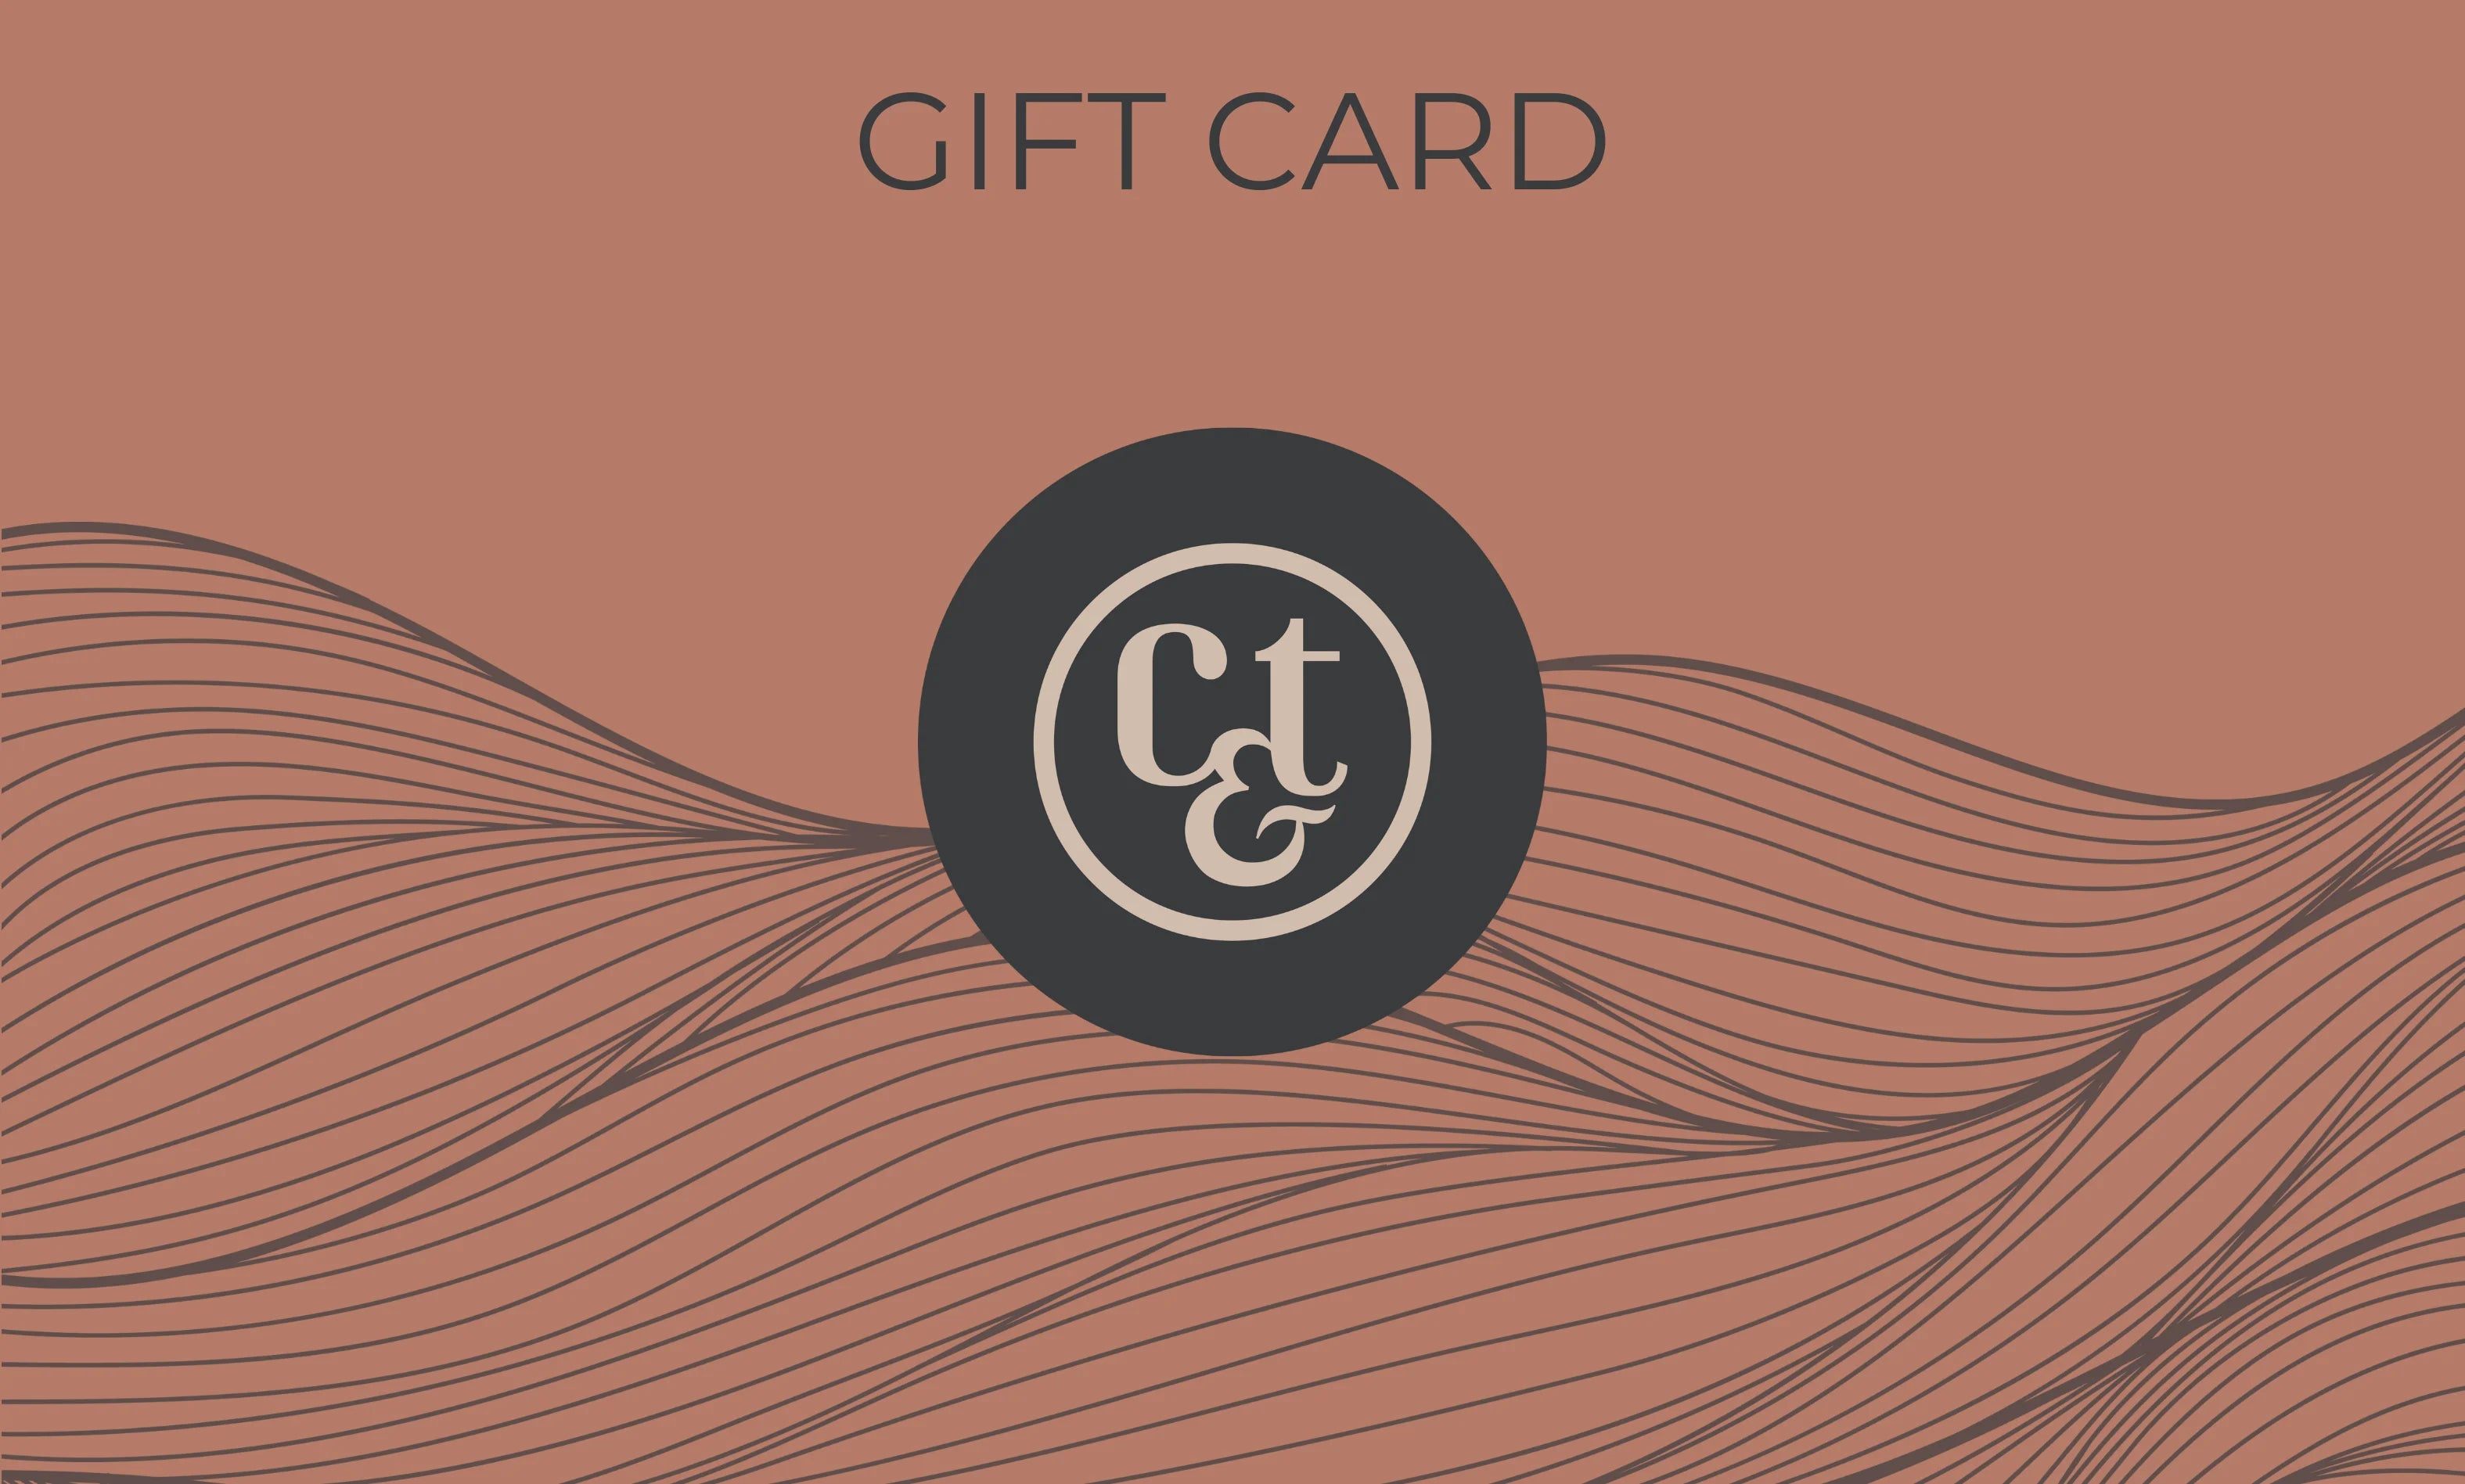 Gift card with a validity of one year